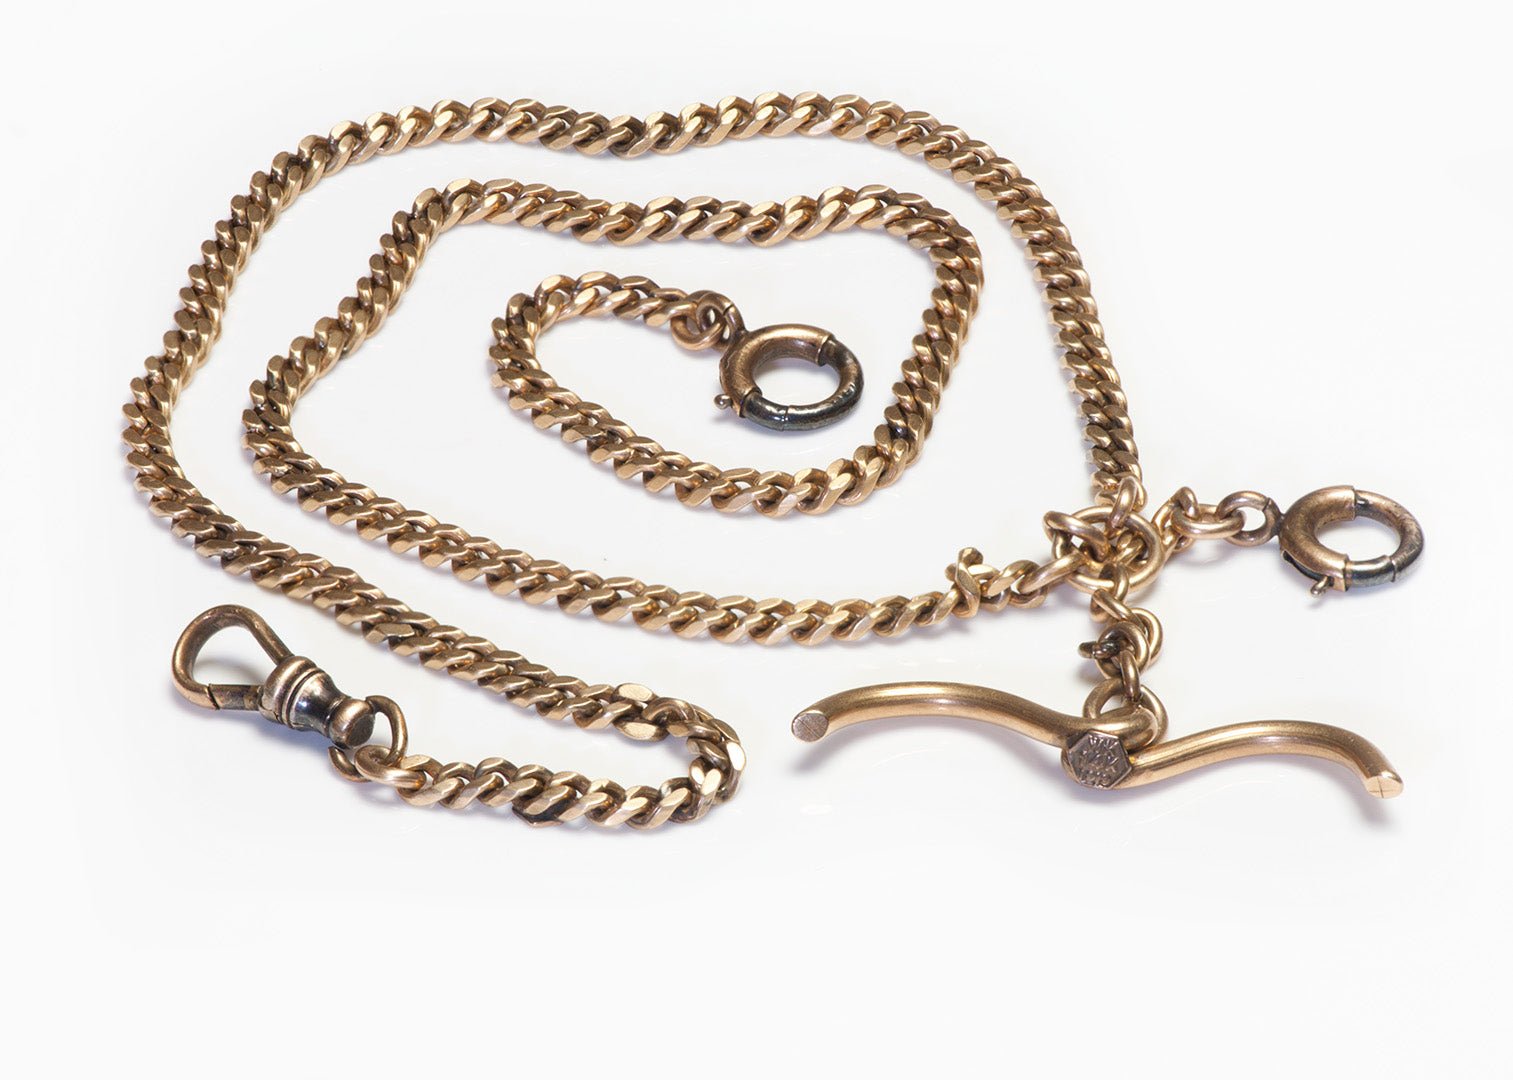 Antique Gold Curb Link Fob Watch Chain